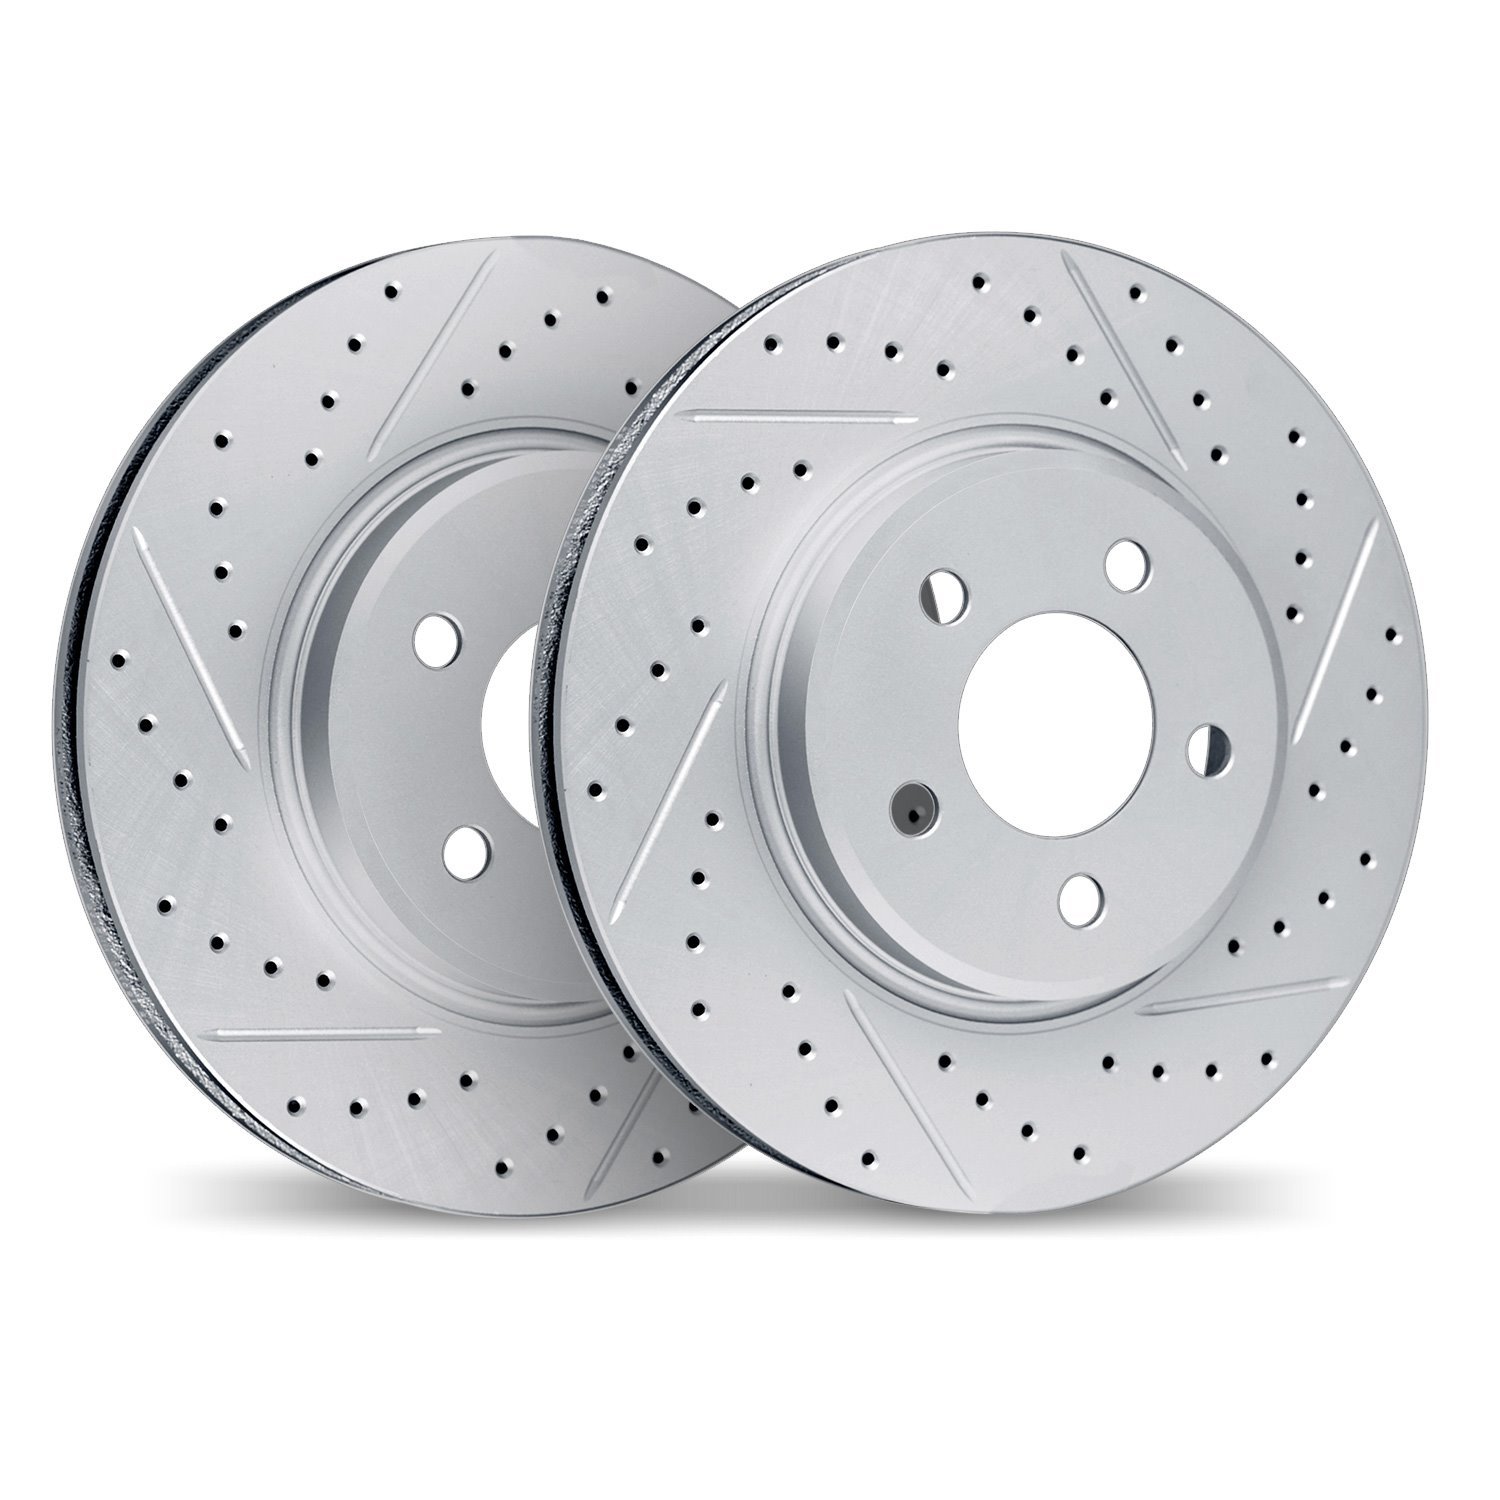 2002-11001 Geoperformance Drilled/Slotted Brake Rotors, 1999-2004 Land Rover, Position: Front